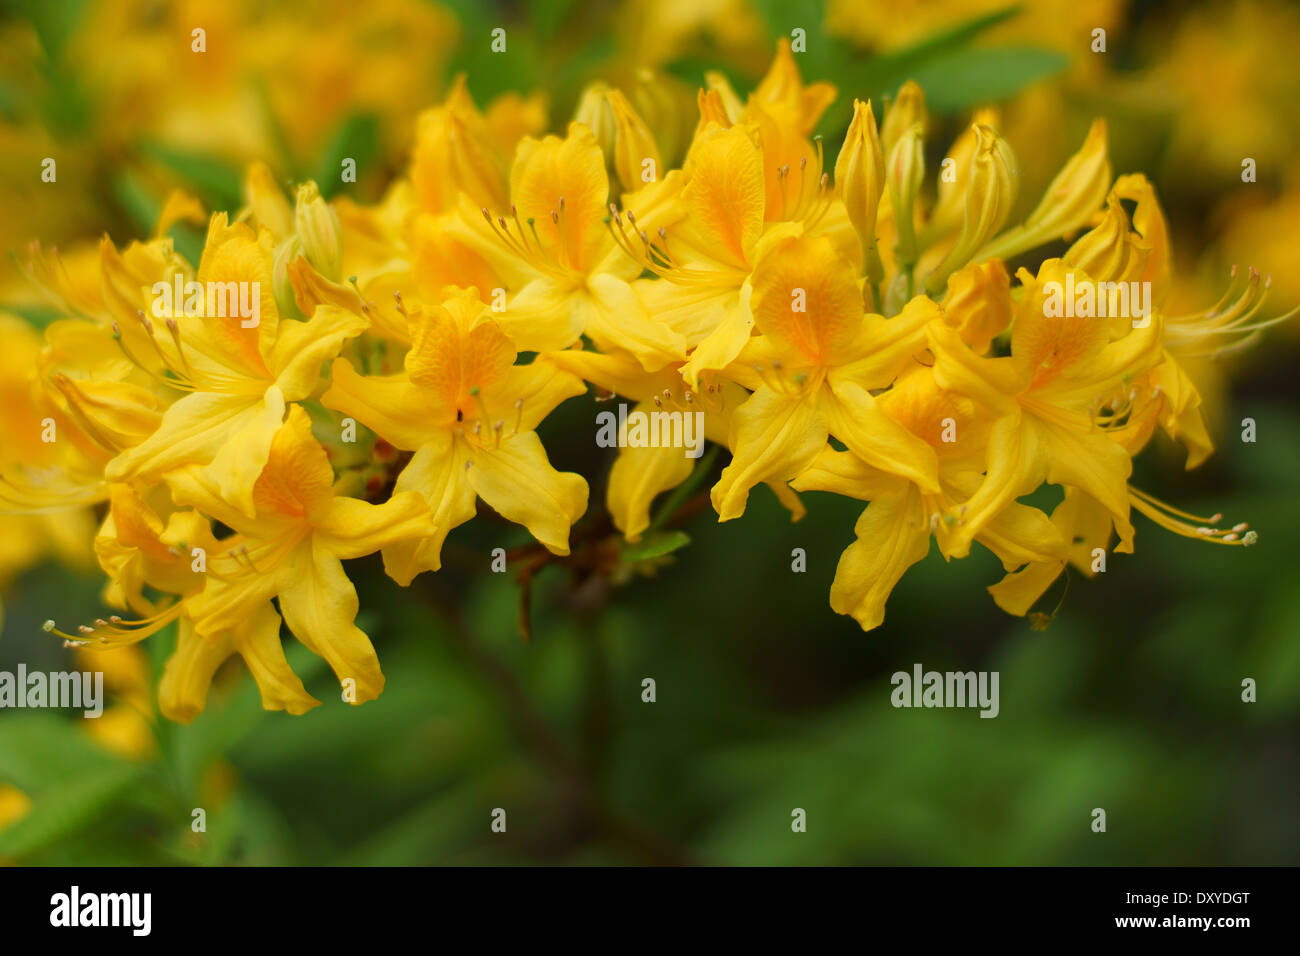 Rich yellow azalea flowers close up Rhododendron luteum Stock Photo